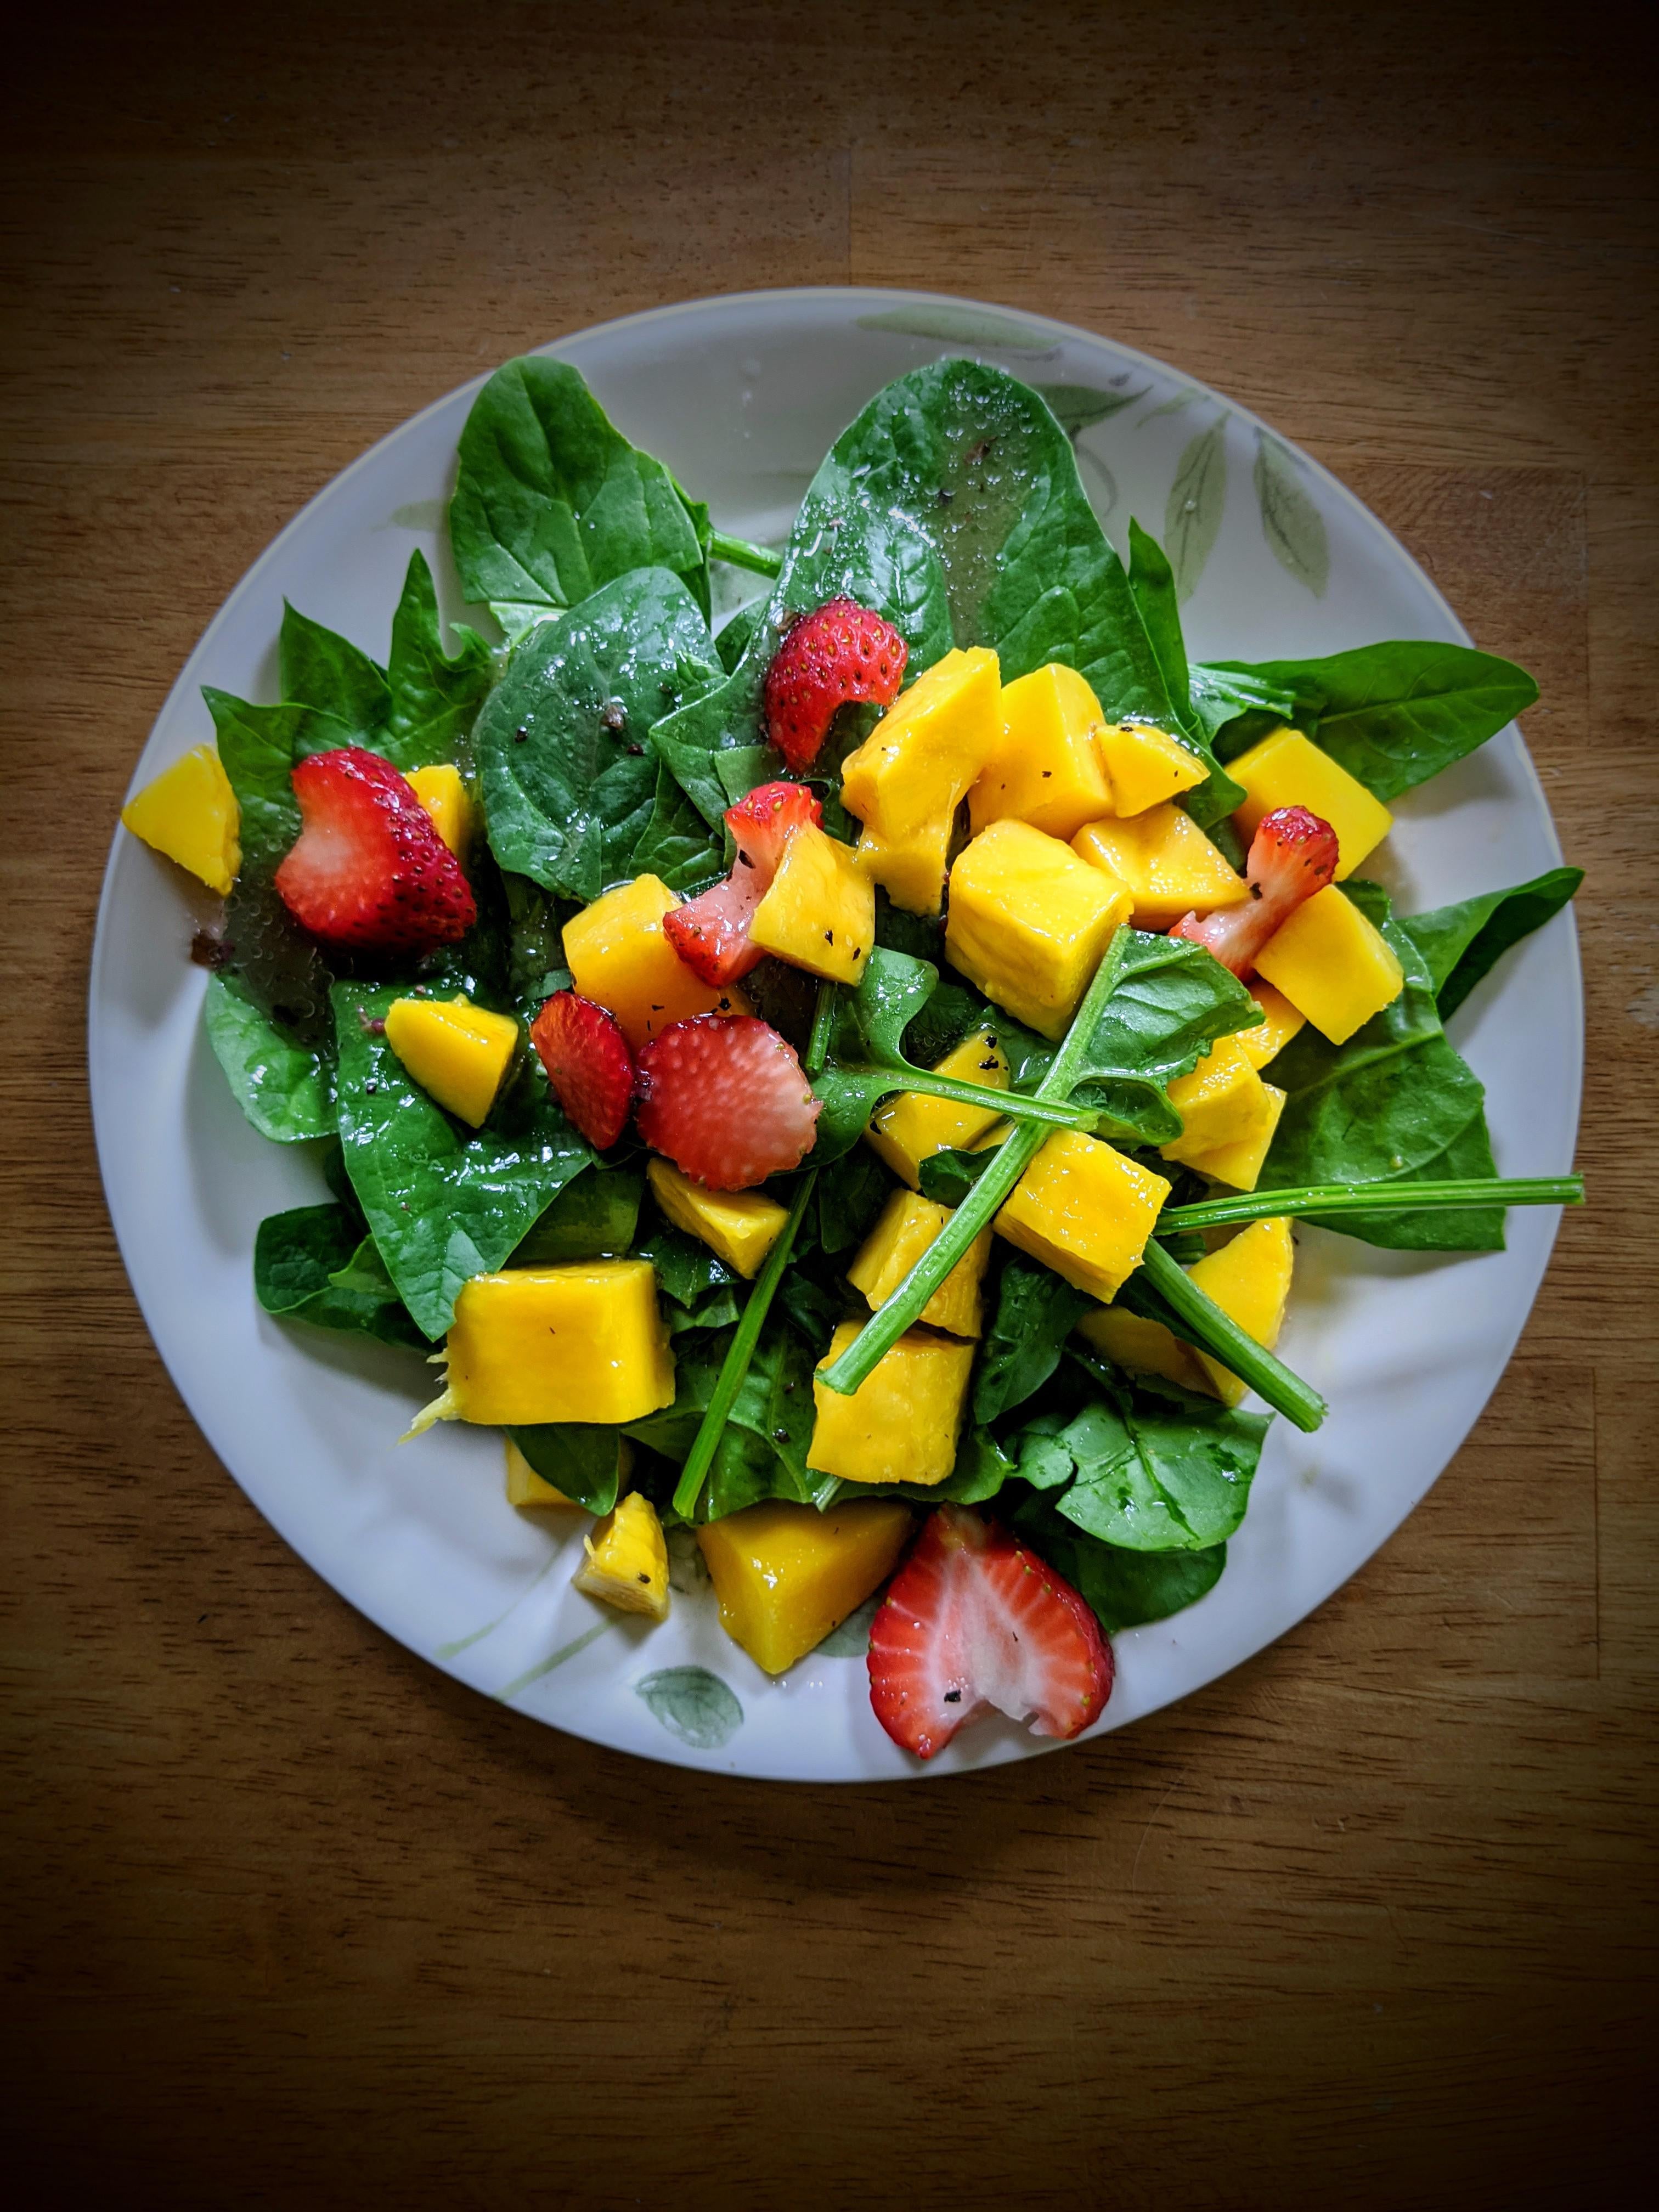 spinach mango and strawberry salad with vinaigrette dressing - Dining ...